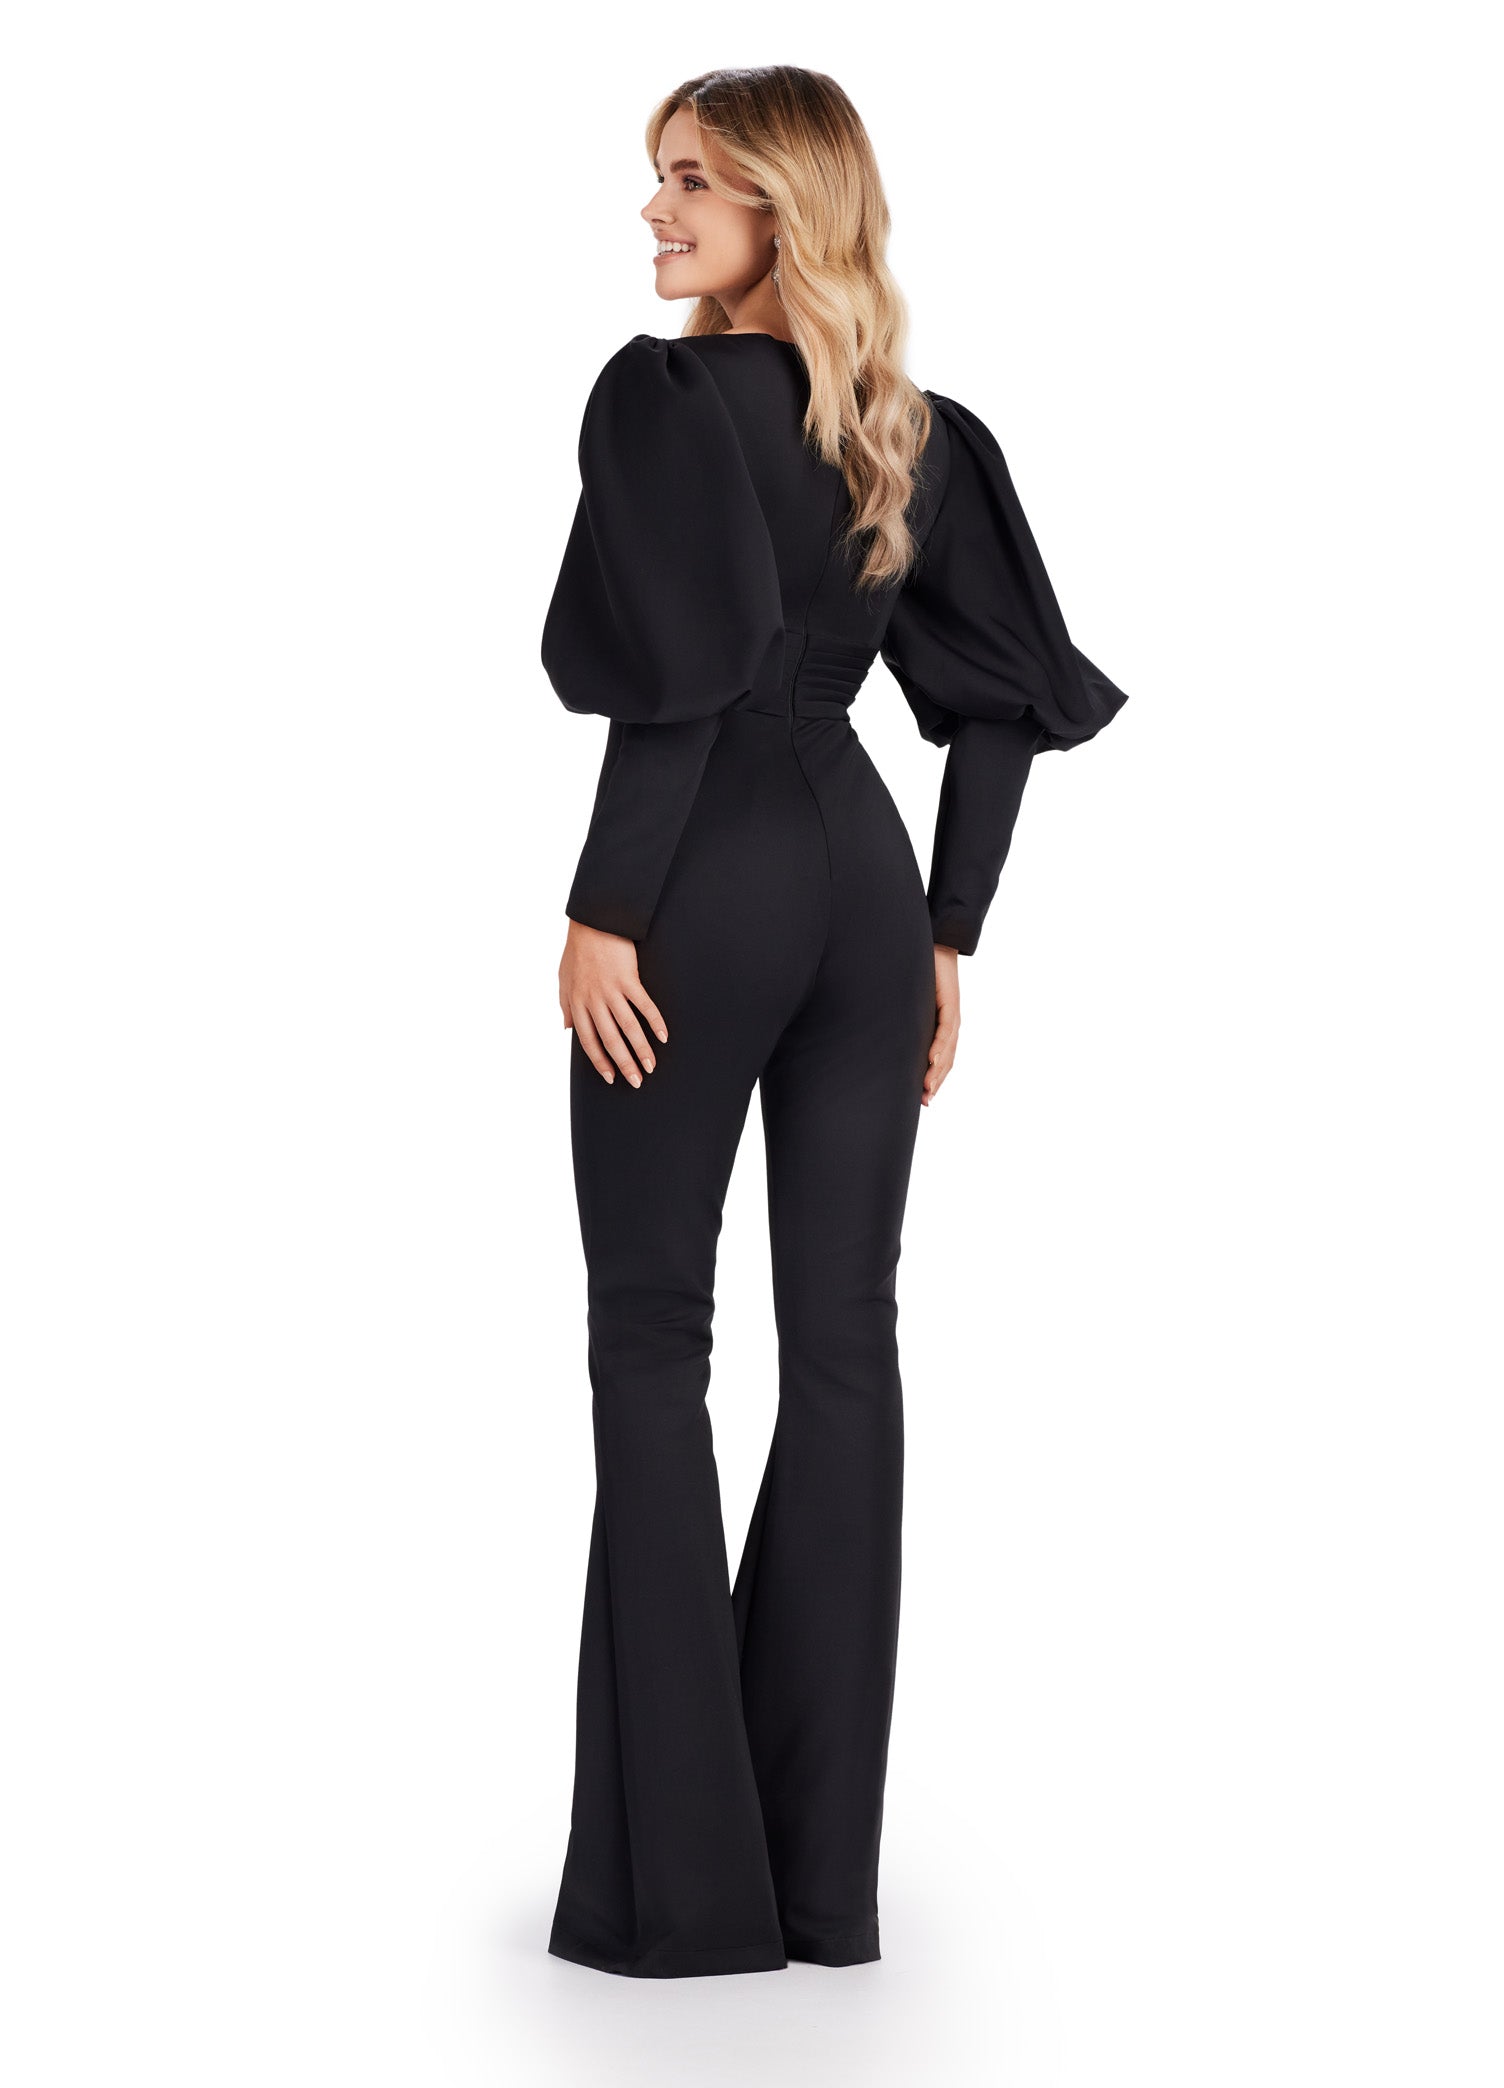 As a leading expert in formal attire, Ashley Lauren presents the 11533 Prom V-Neck Scuba Jumpsuit with Bishop Sleeves. Made from high-quality scuba fabric, this jumpsuit features a flattering V-neckline and bishop sleeves for added elegance. Perfect for any formal event, this jumpsuit exudes sophistication and style. his striking scuba jumpsuit features a v-neckline and bishop sleeves.